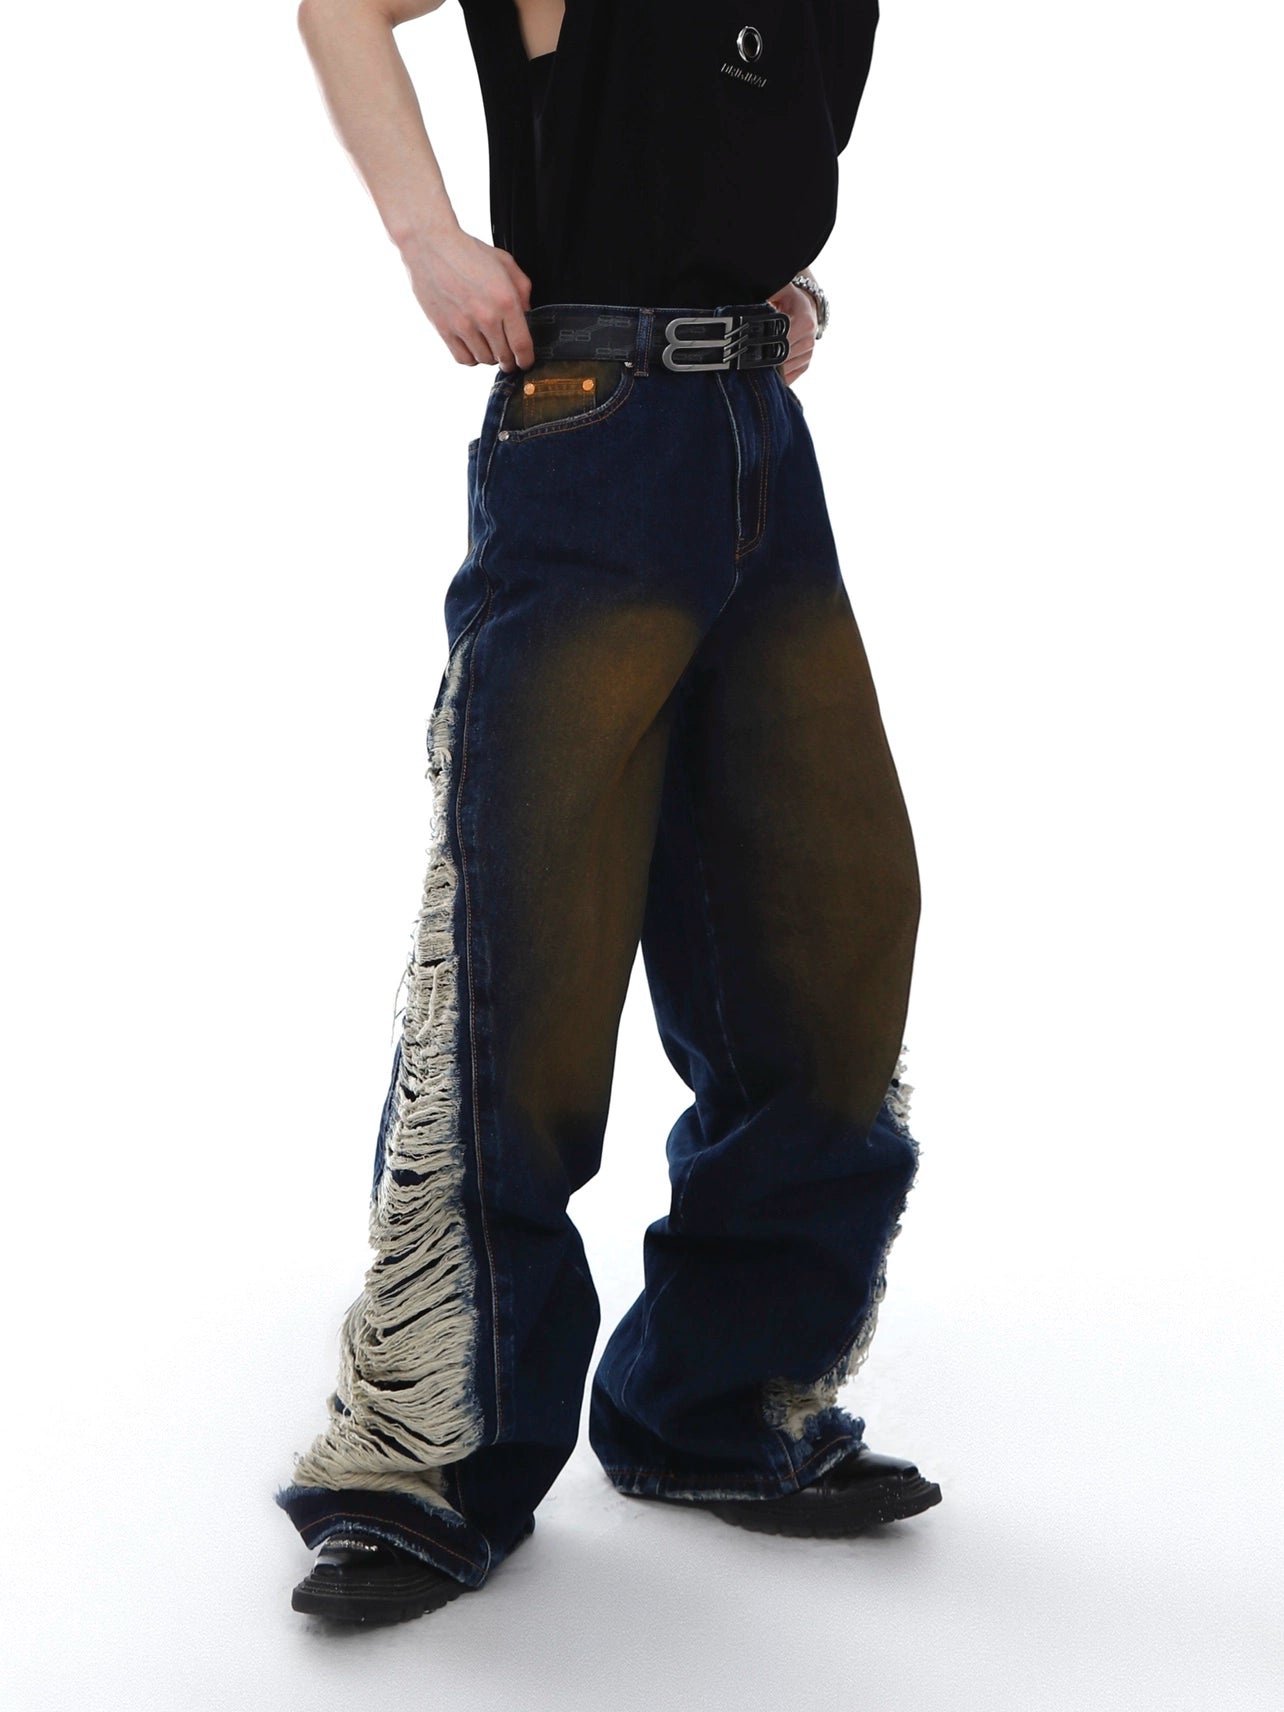 CulturE Minority Heavy Industry Retro Washed Destroyed Jeans Micro Flared Pants Slim and Versatile Neutral Casual Pants